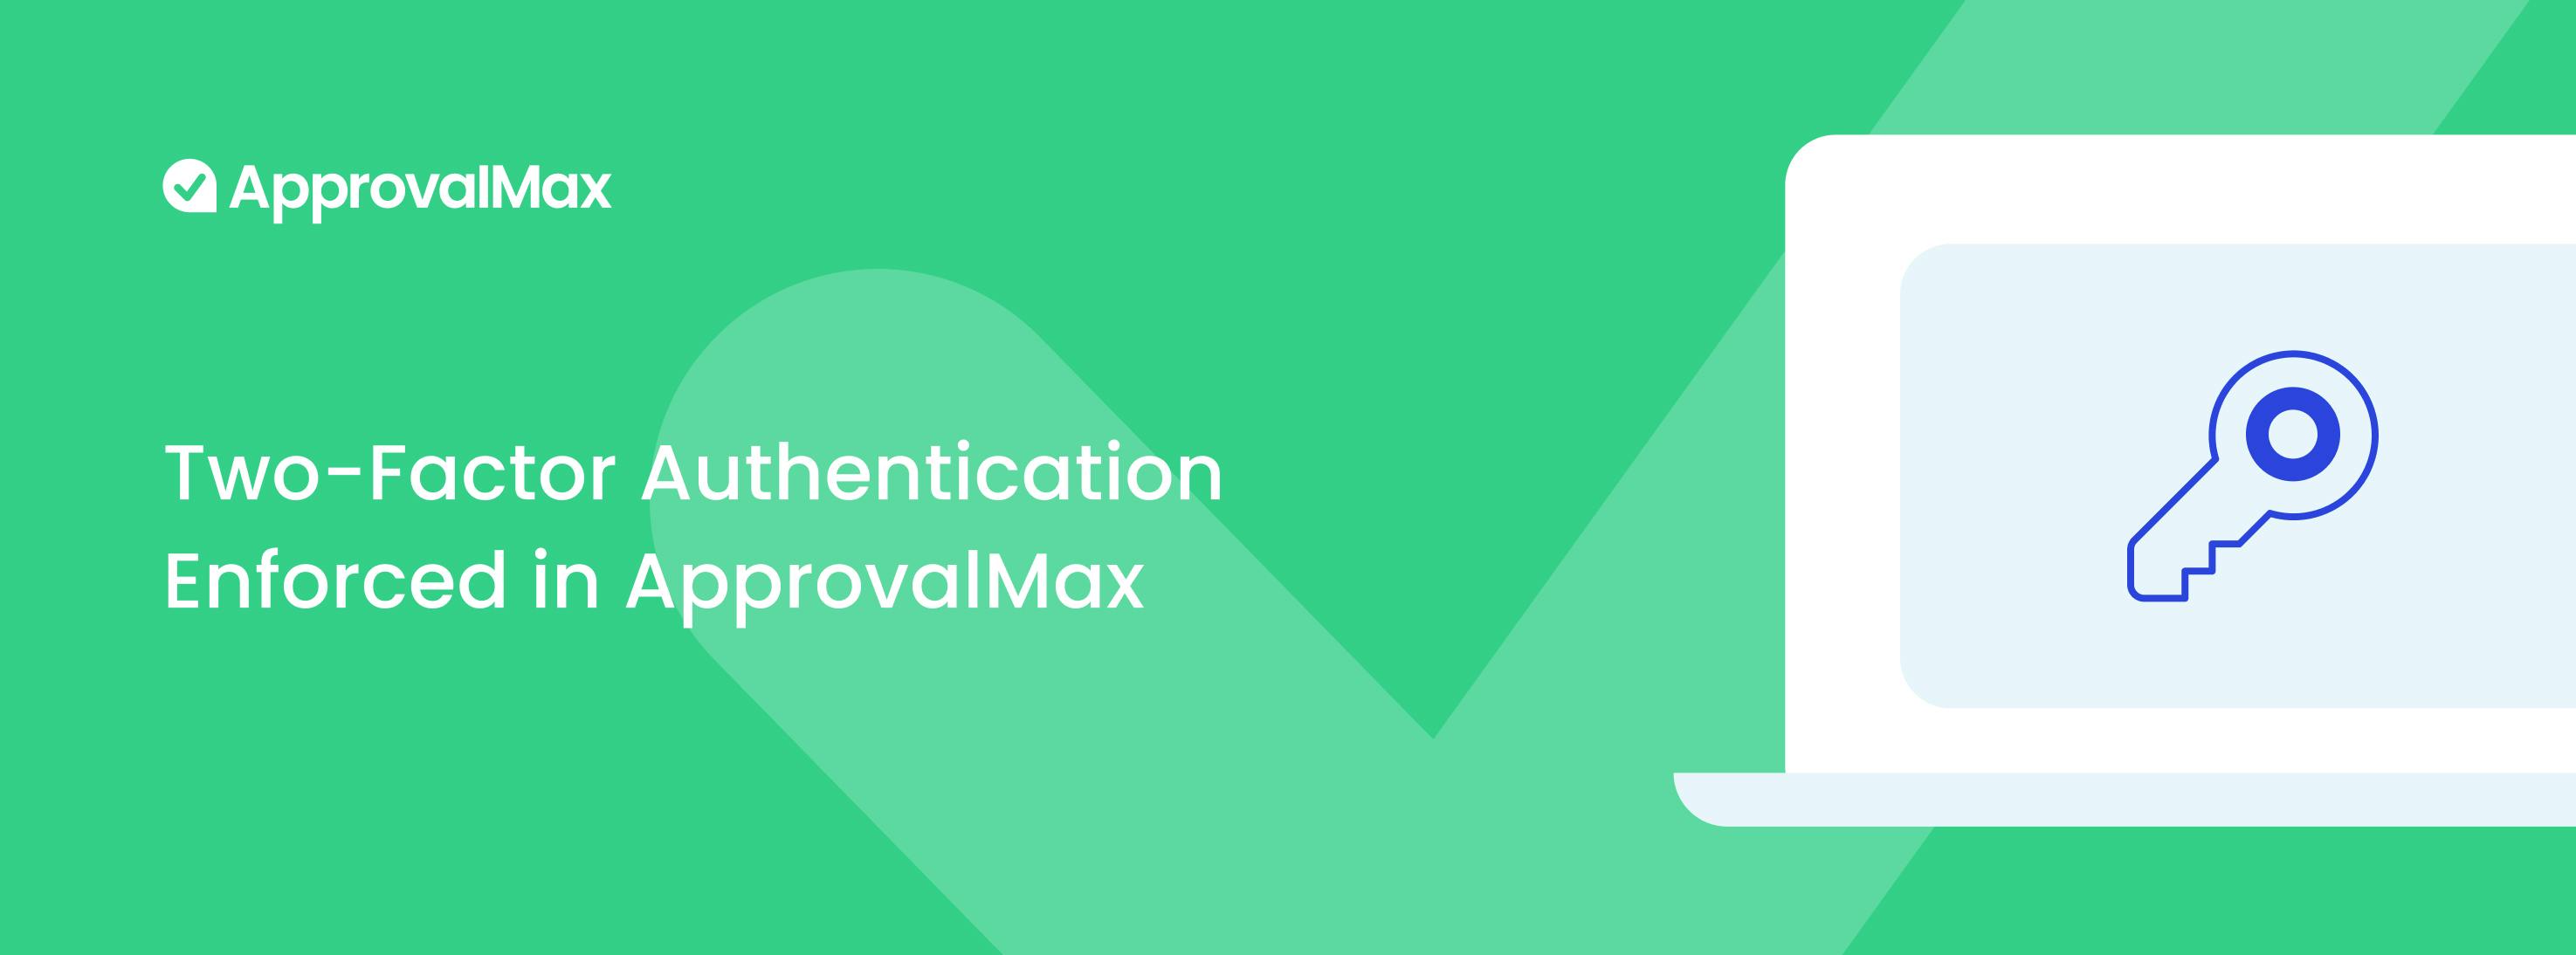 Two-Factor Authentication Enforced in ApprovalMax image